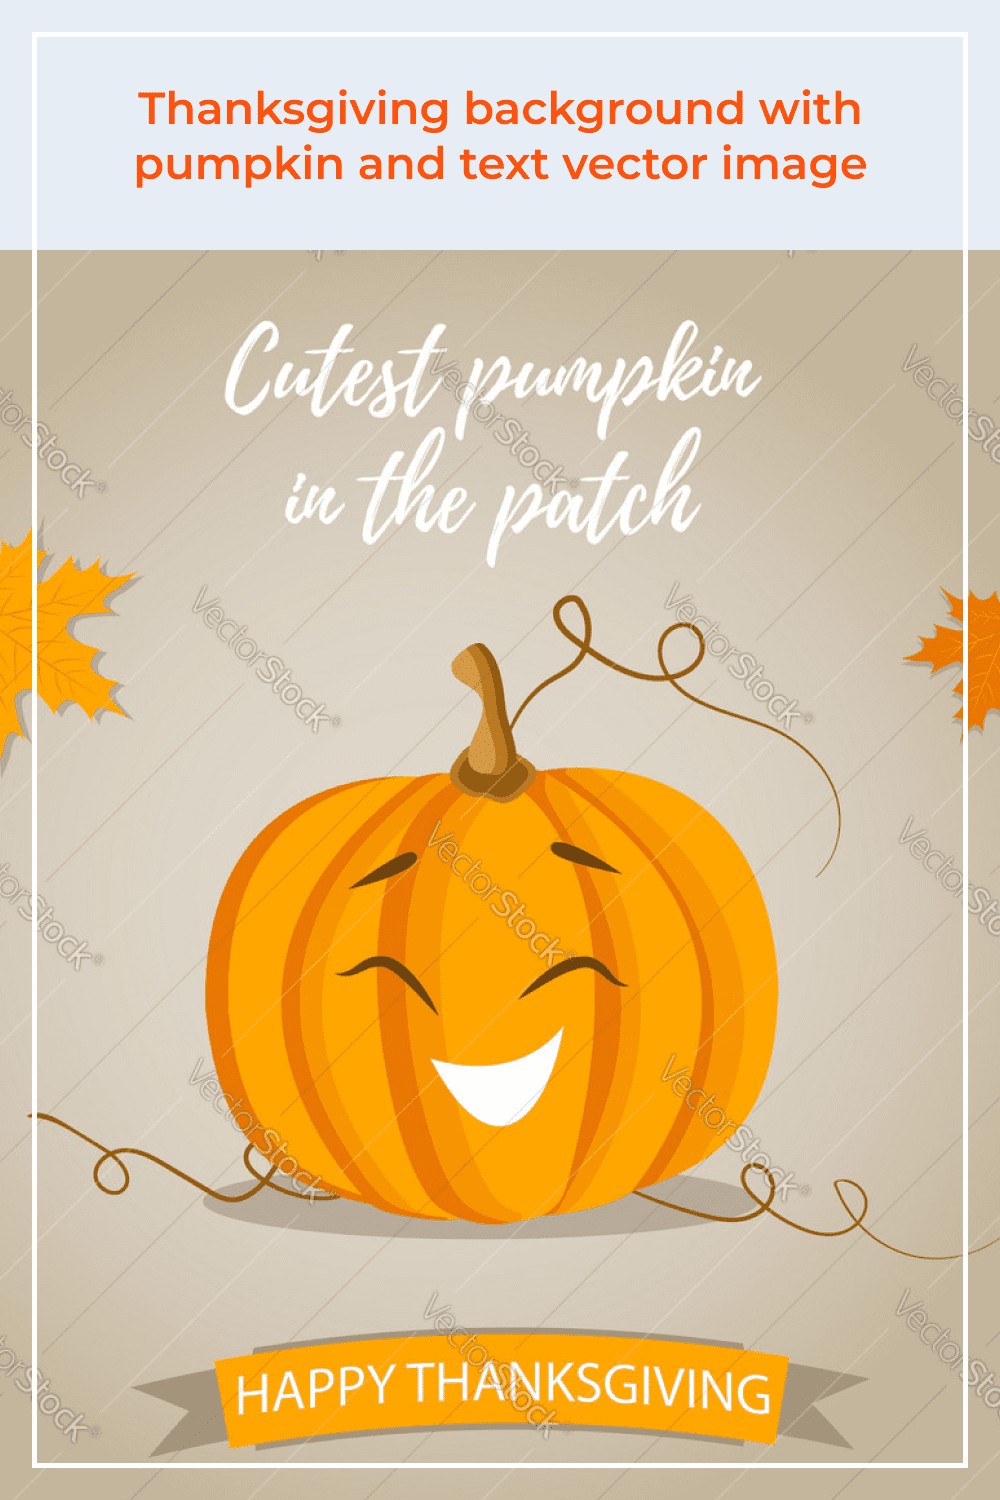 Thanksgiving background with pumpkin and text vector image.